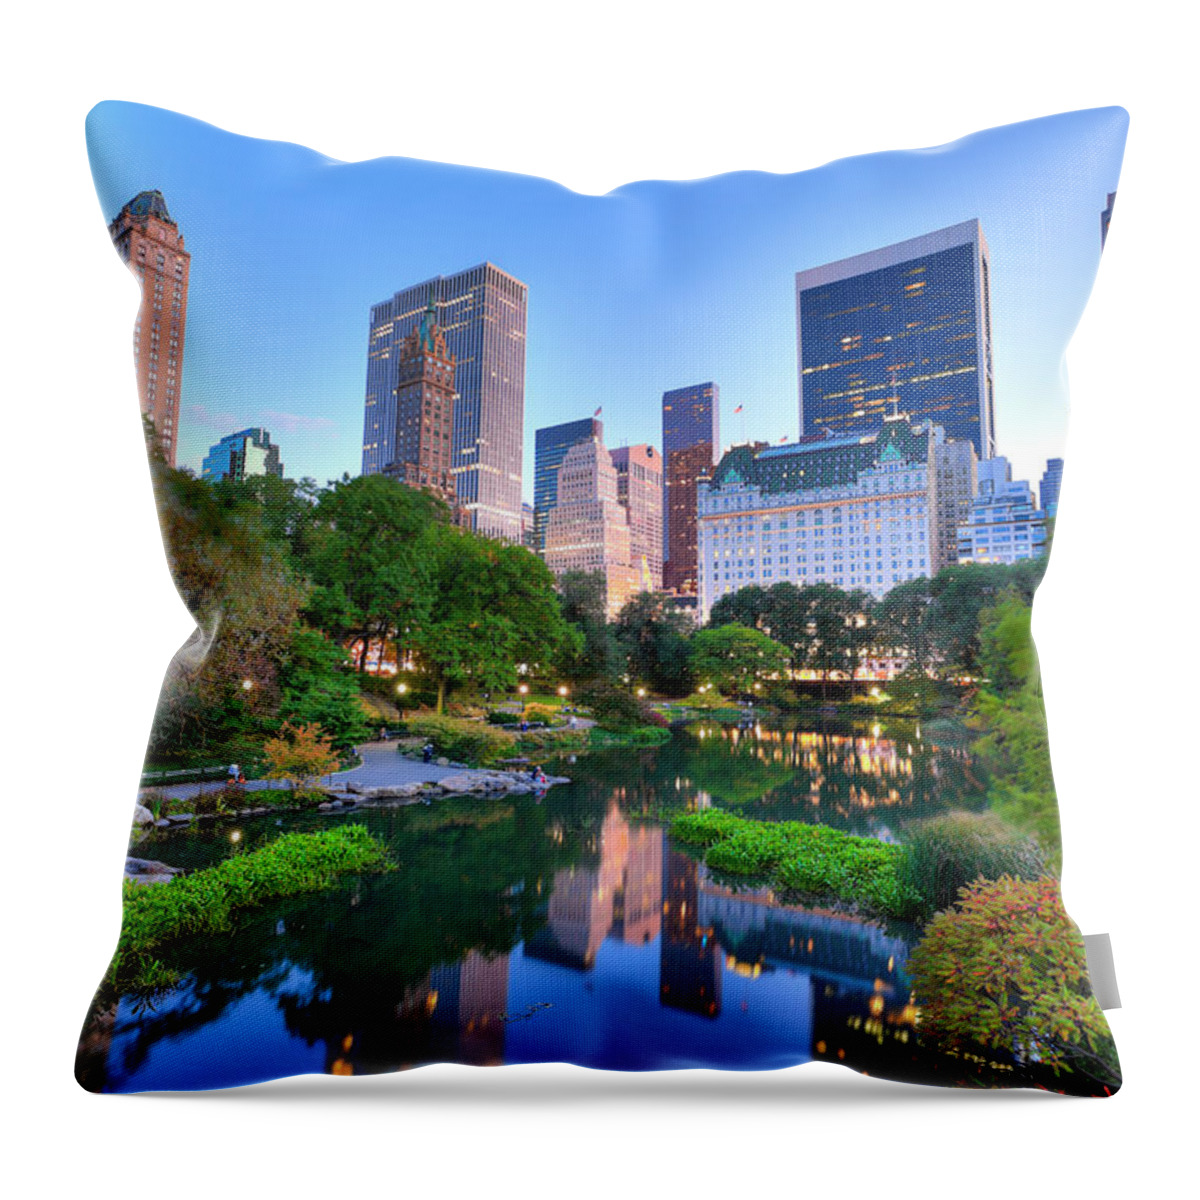 Tranquility Throw Pillow featuring the photograph Central Park In New York City At Dusk by Pawel.gaul